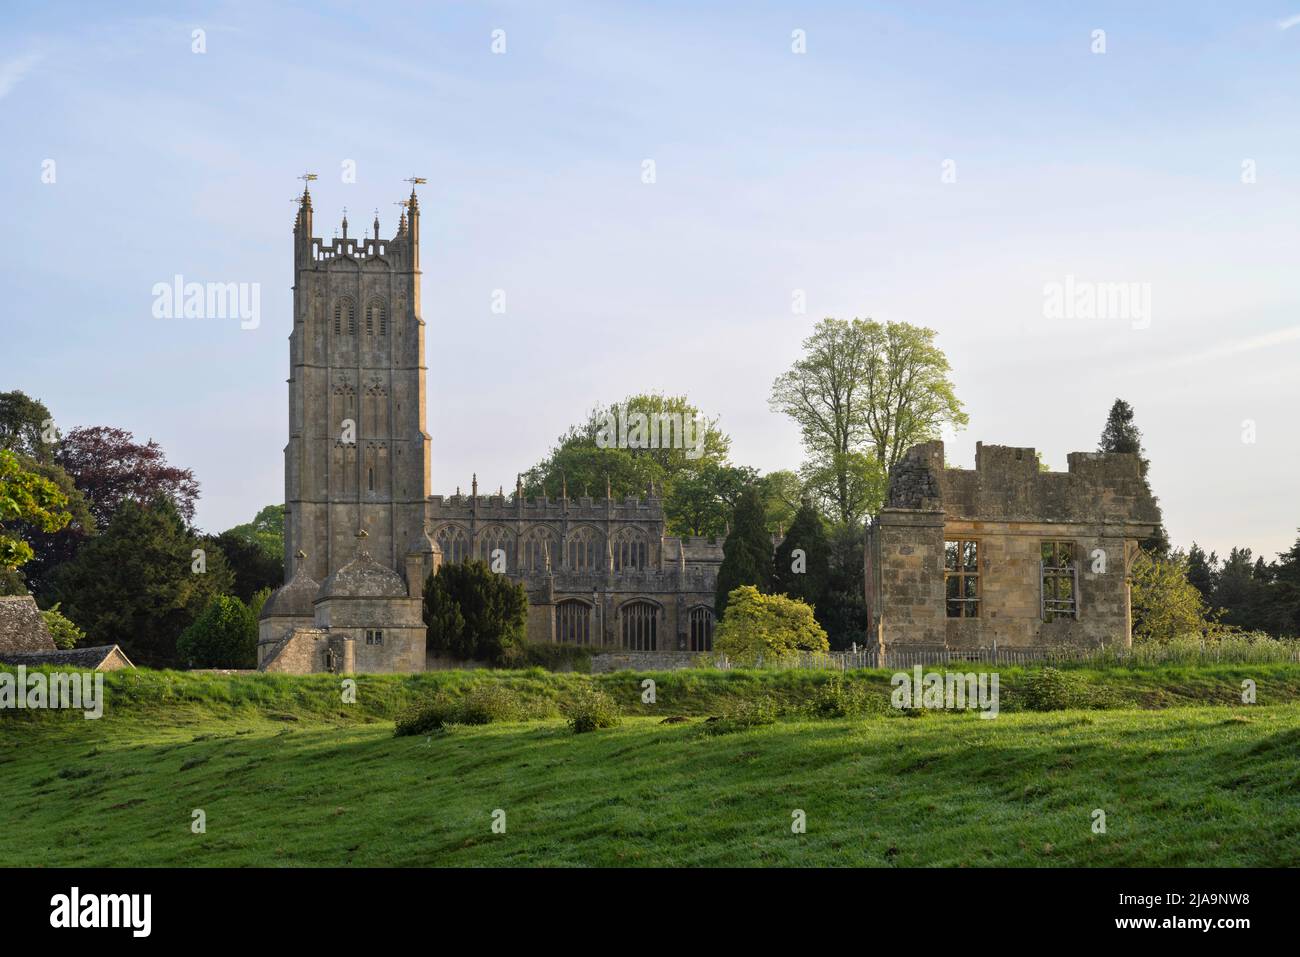 Church and ruins at Chipping Campden, Cotswolds, England. Stock Photo